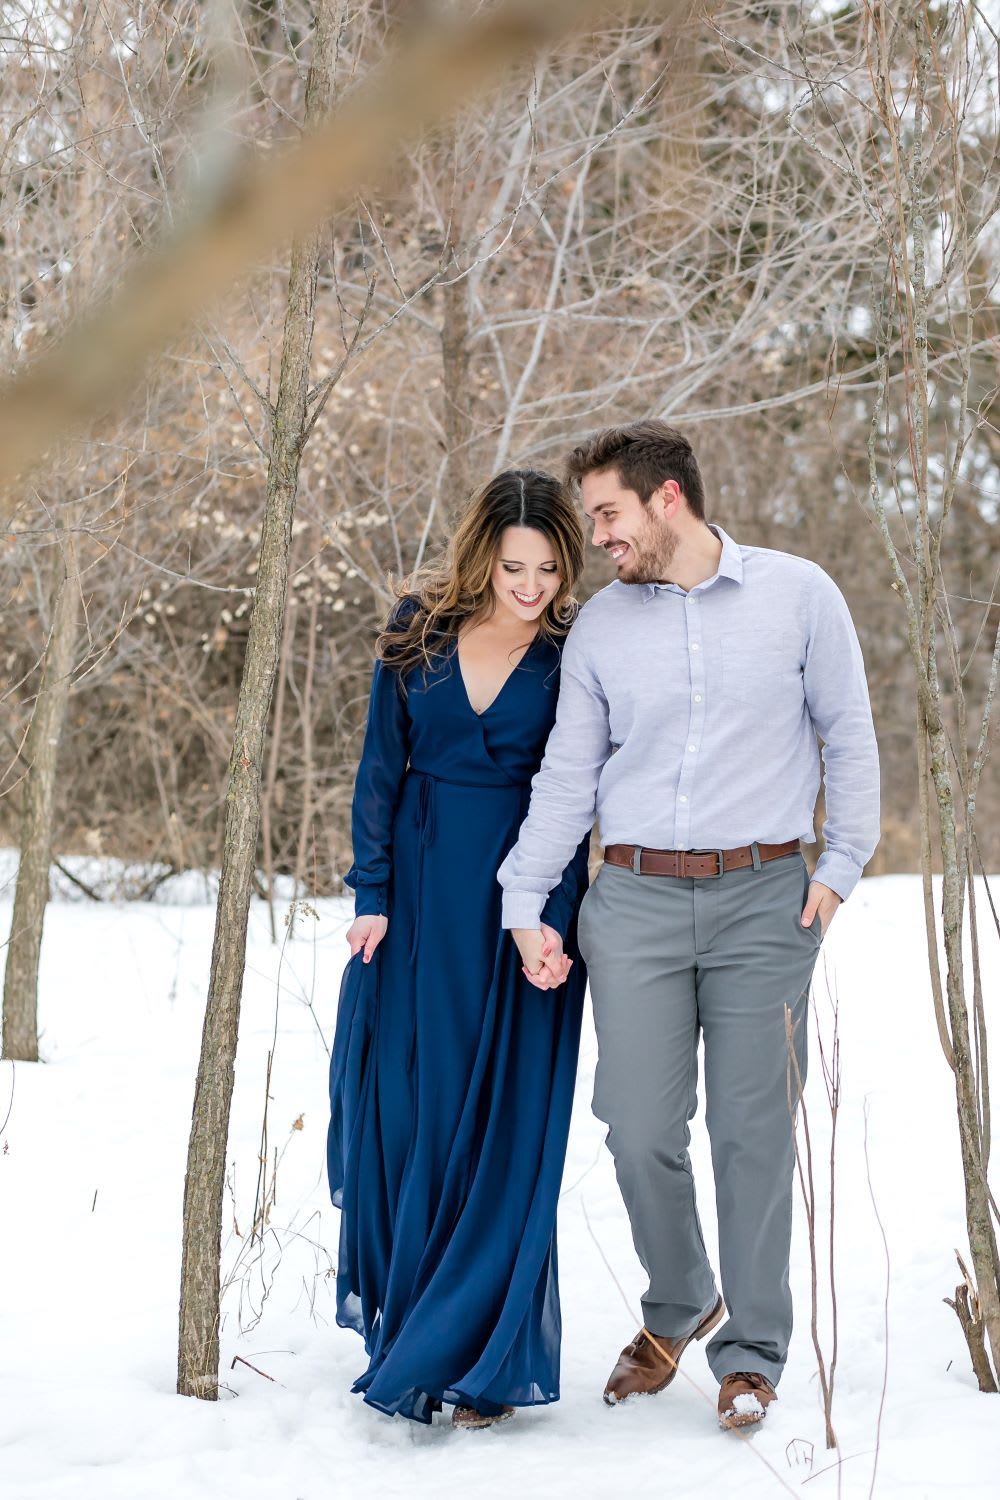 Engagement Photos In Winter ...